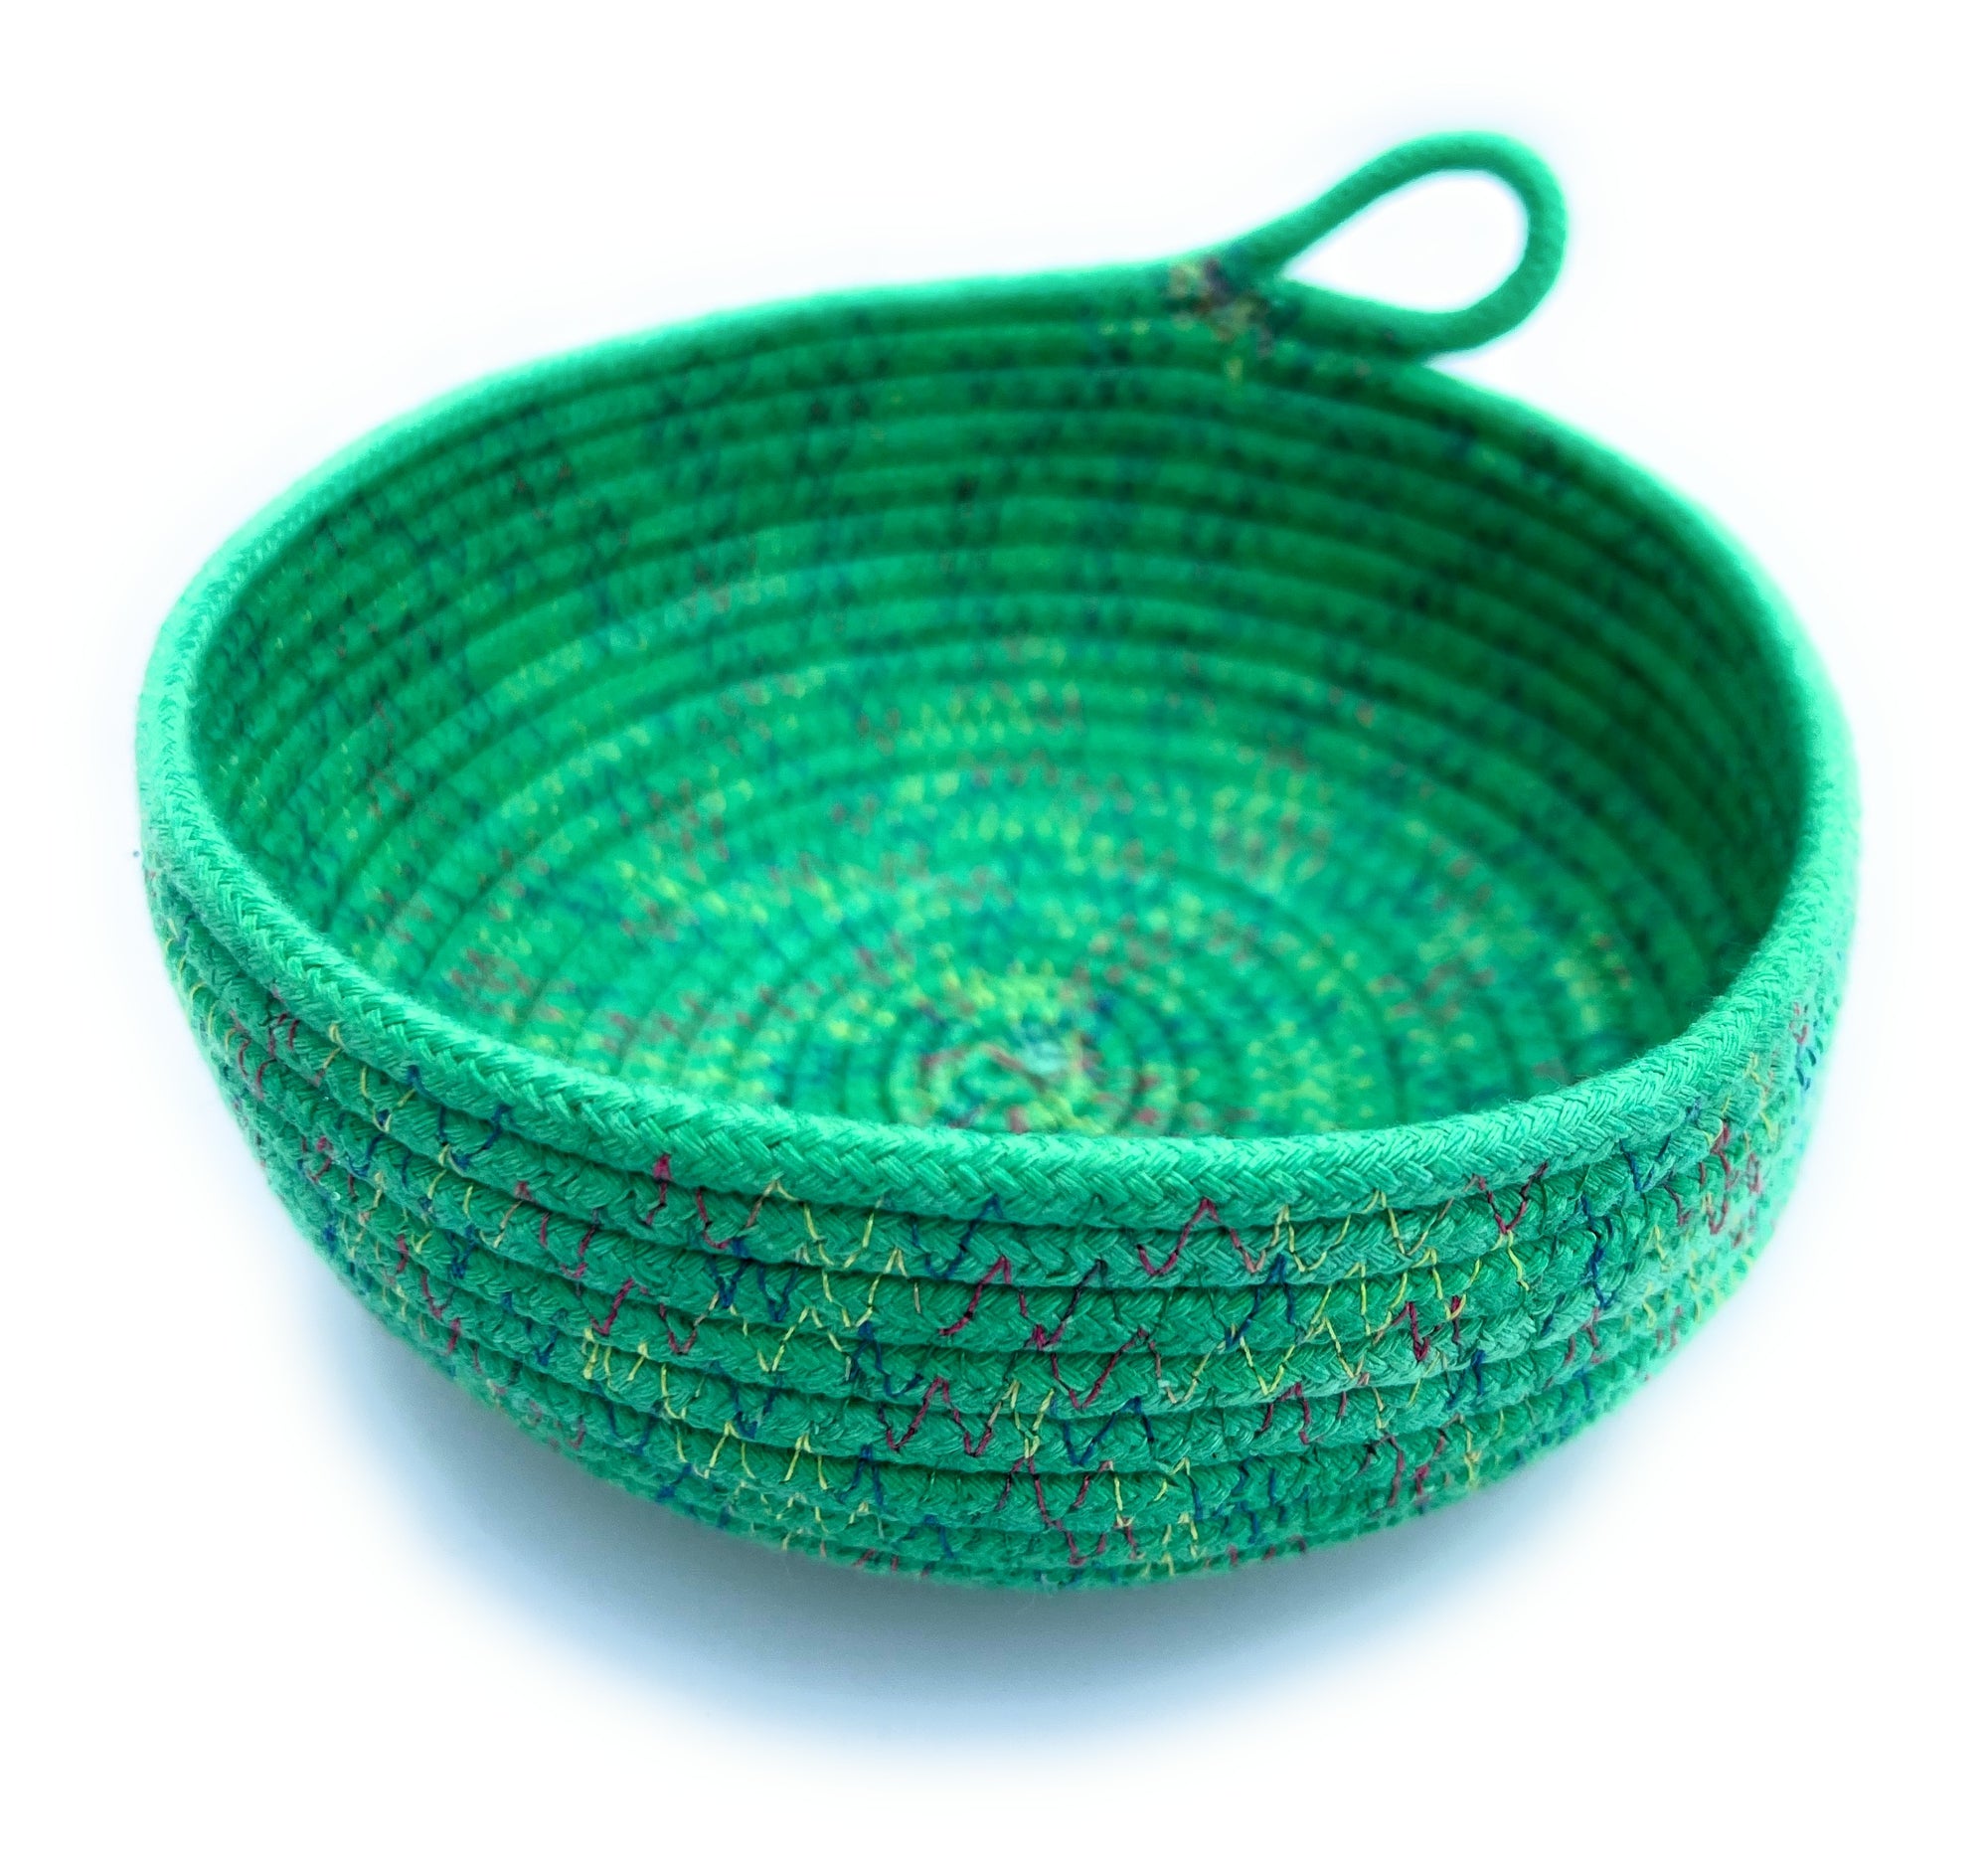 Coiled Rope Bowl Mint Julep Green